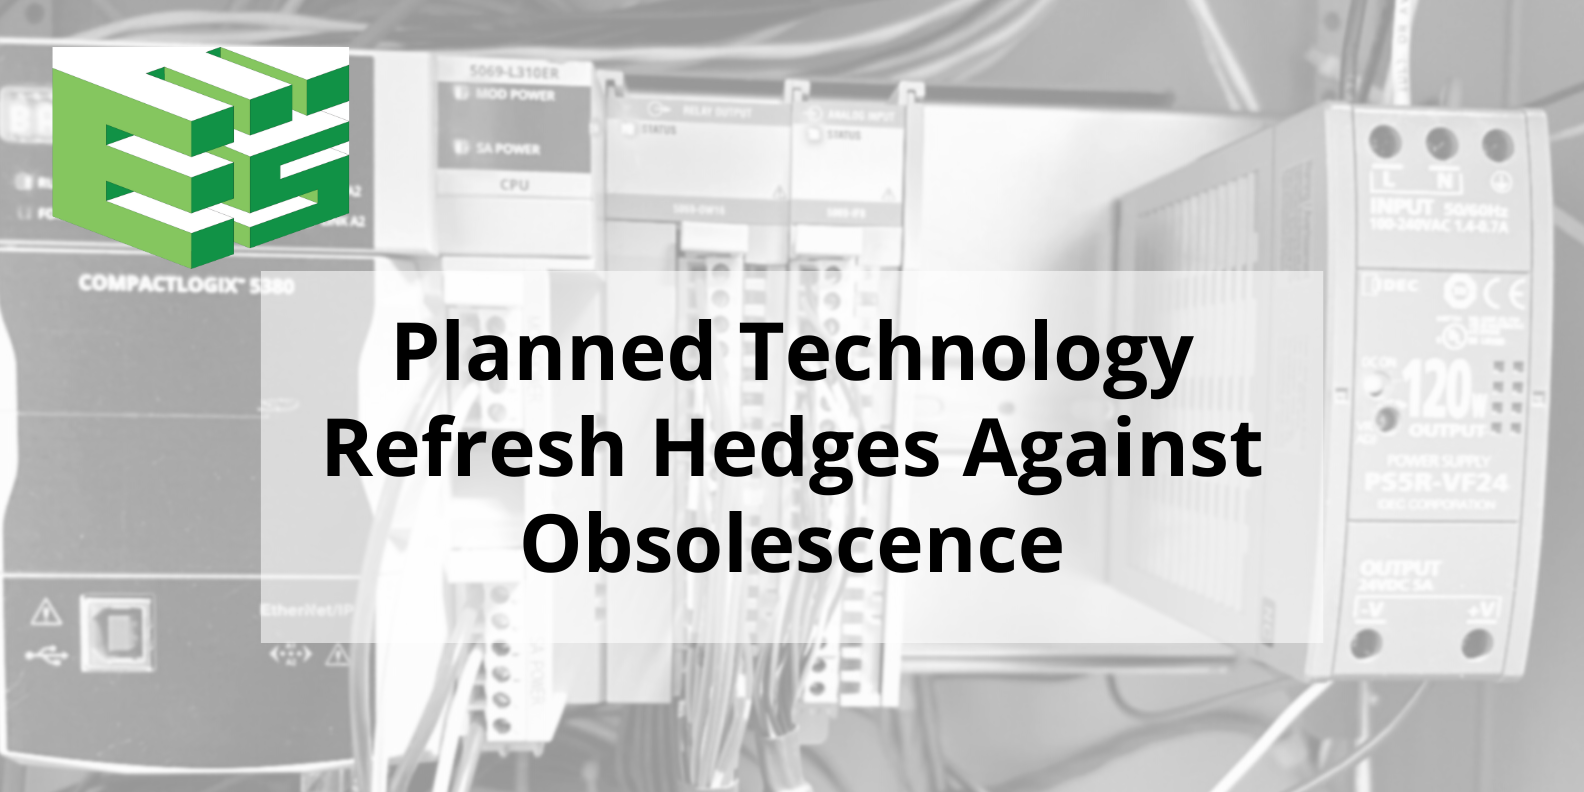 EES planned technology refresh